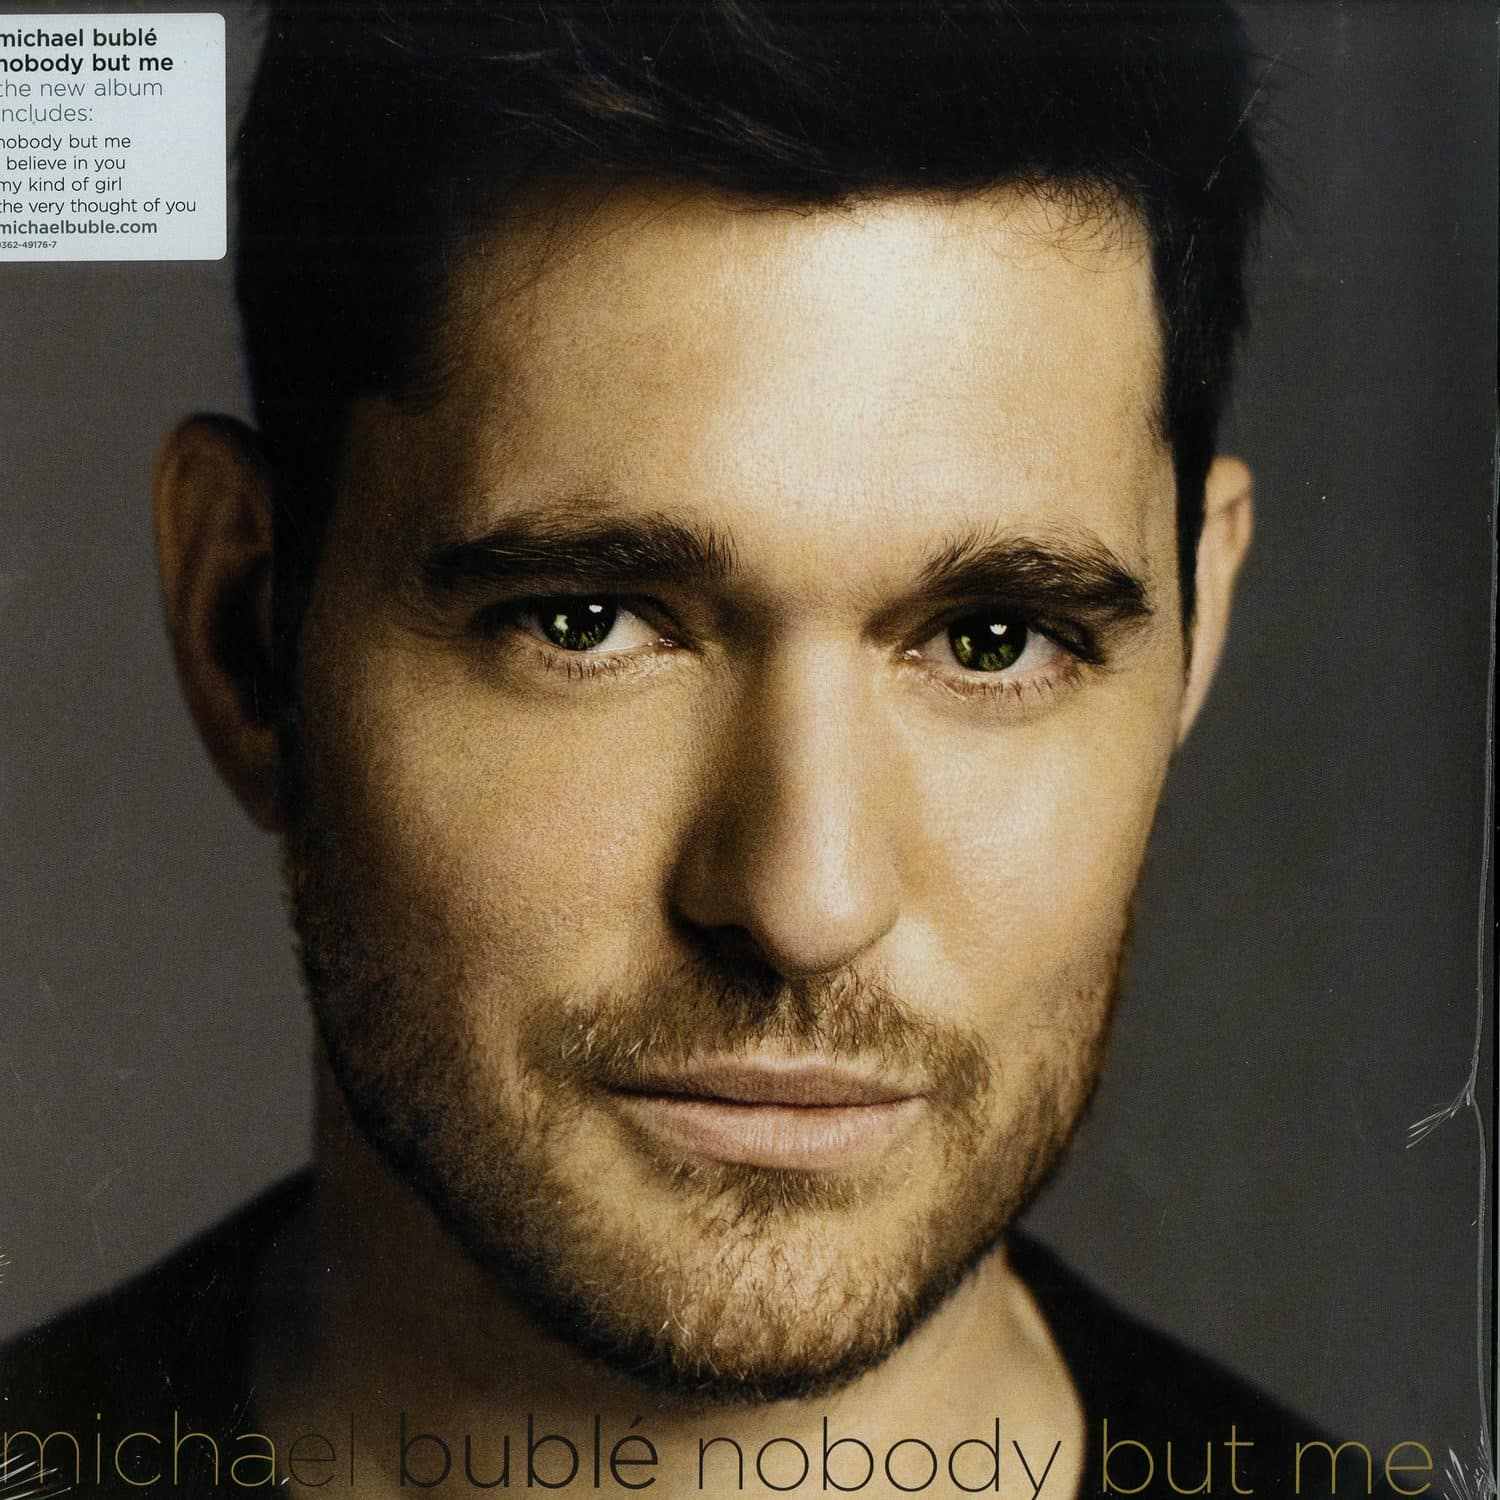 Michael Buble - NOBODY BUT ME 